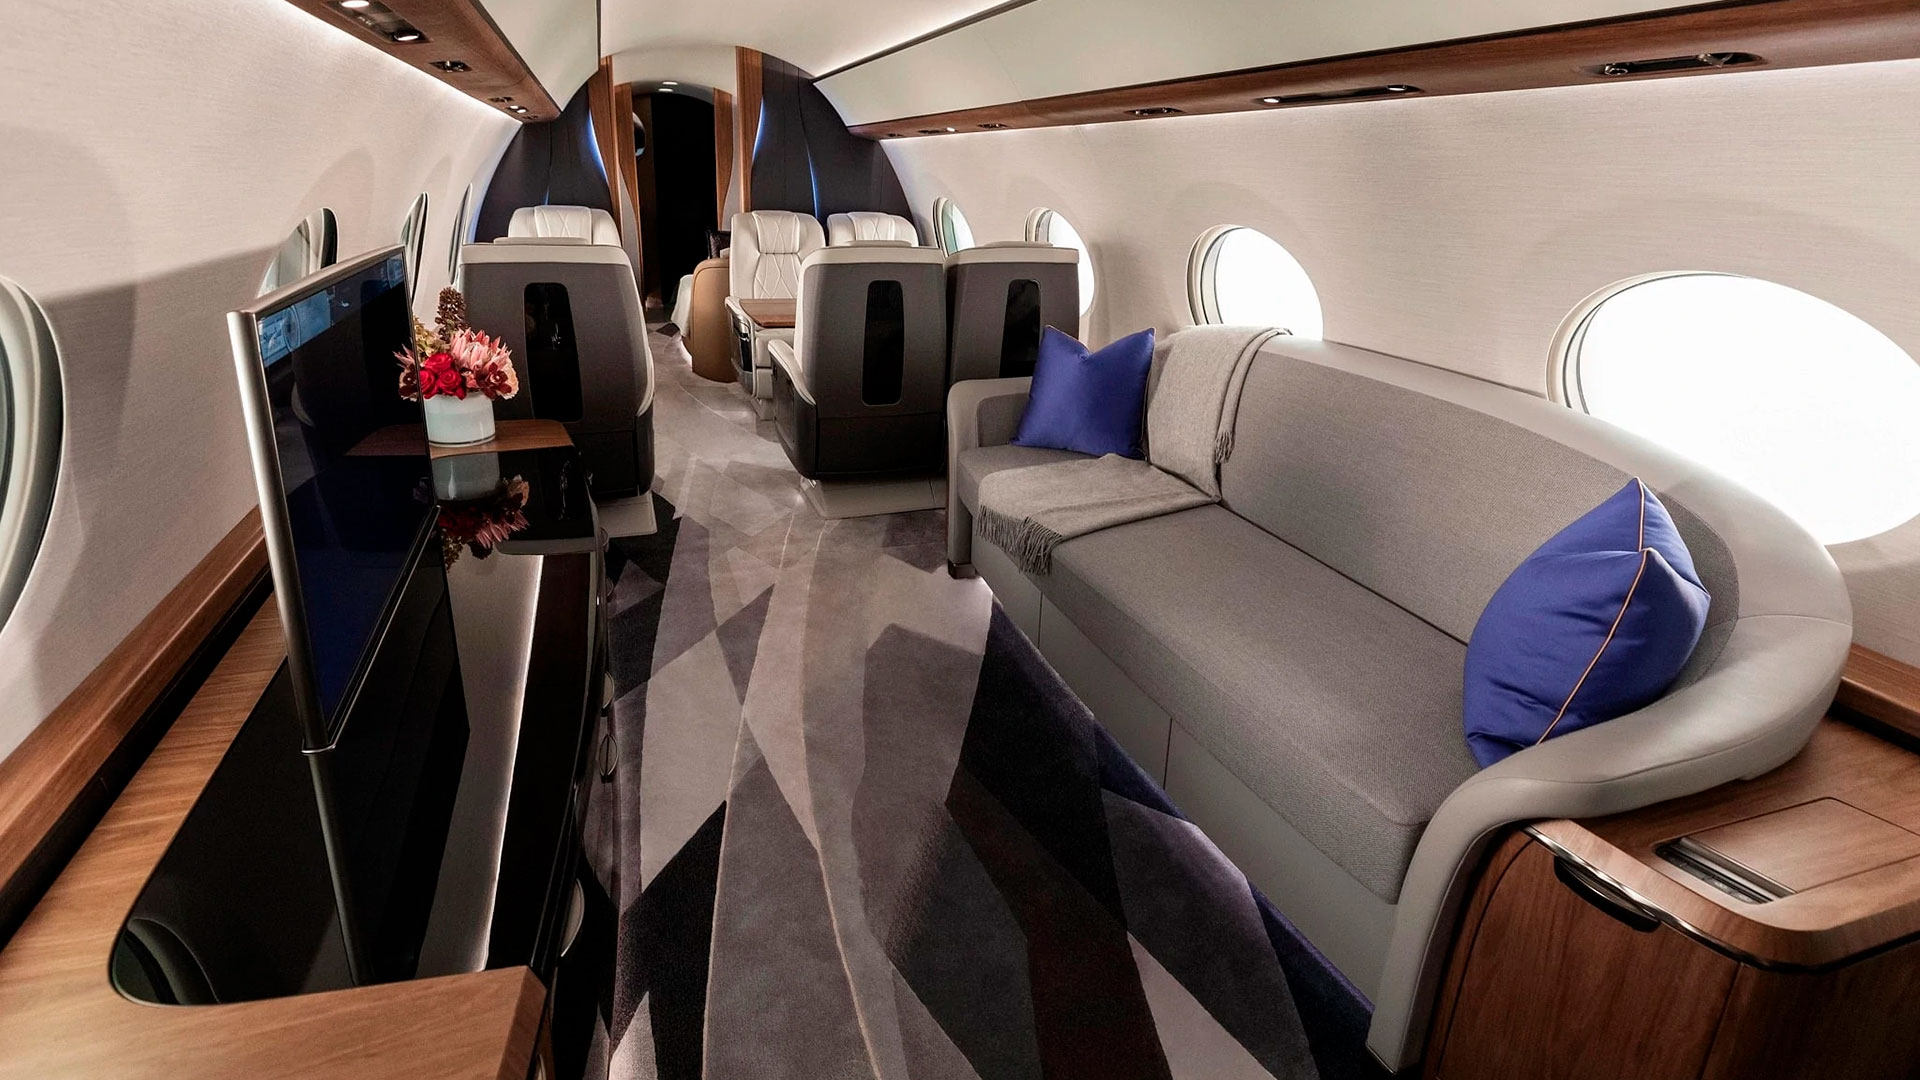 The modern aircraft contains up to 5 lounges that can be configured to suit the customer